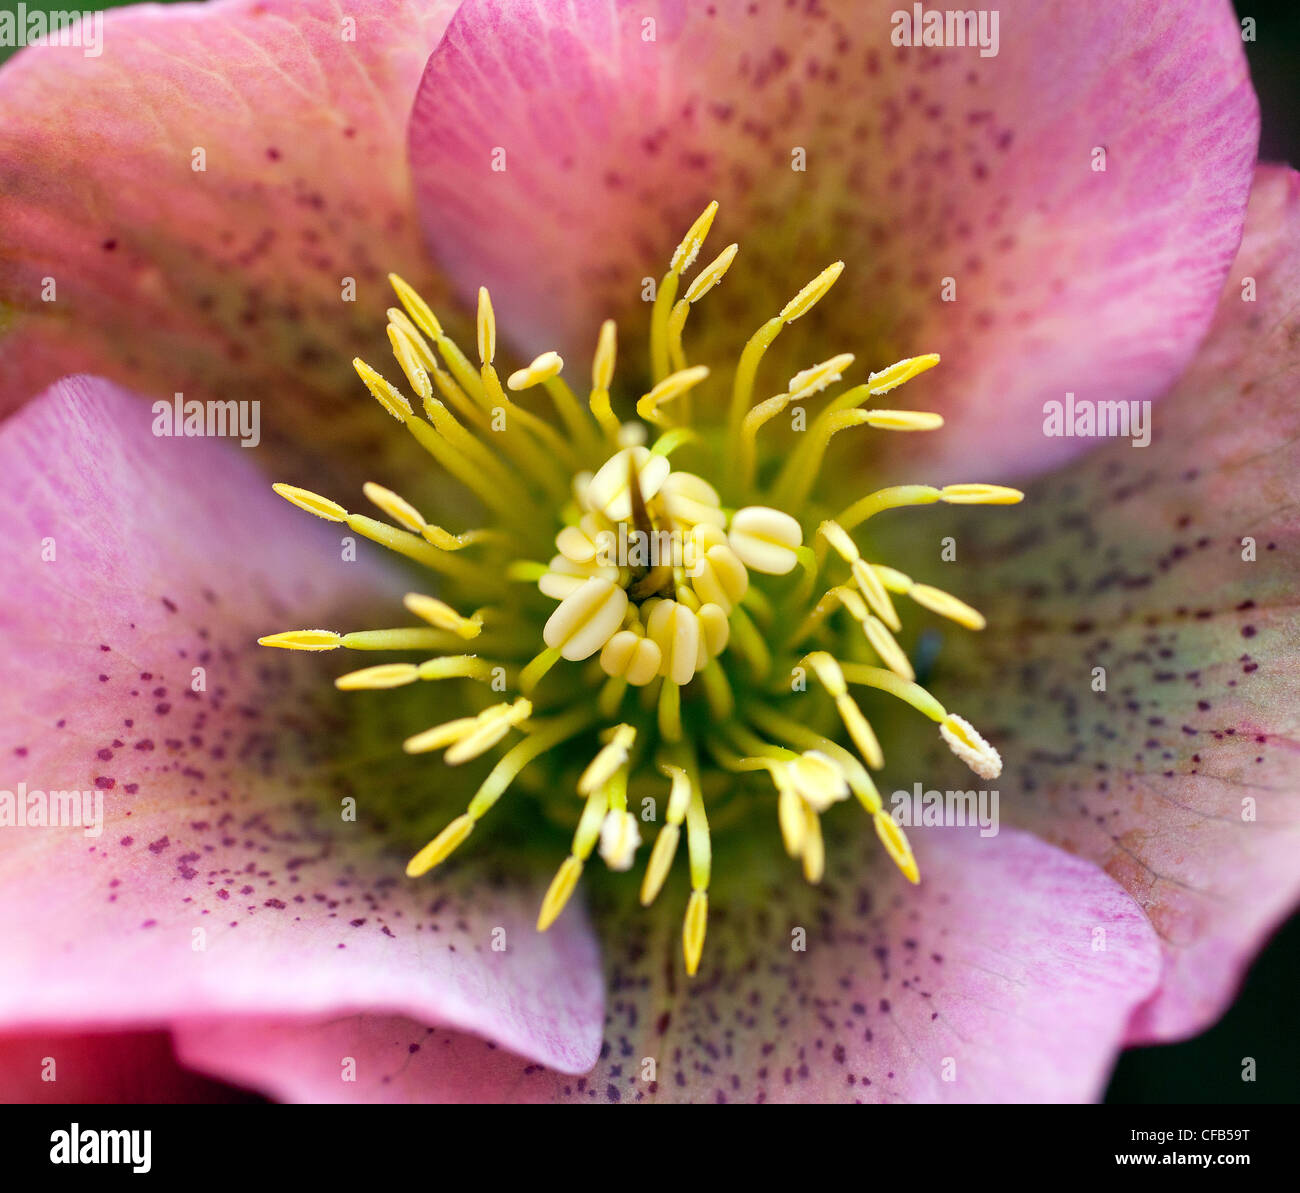 Macro photography of a pretty, delicate Christmas or Lenten Rose opening in the Spring sunshine. Stock Photo